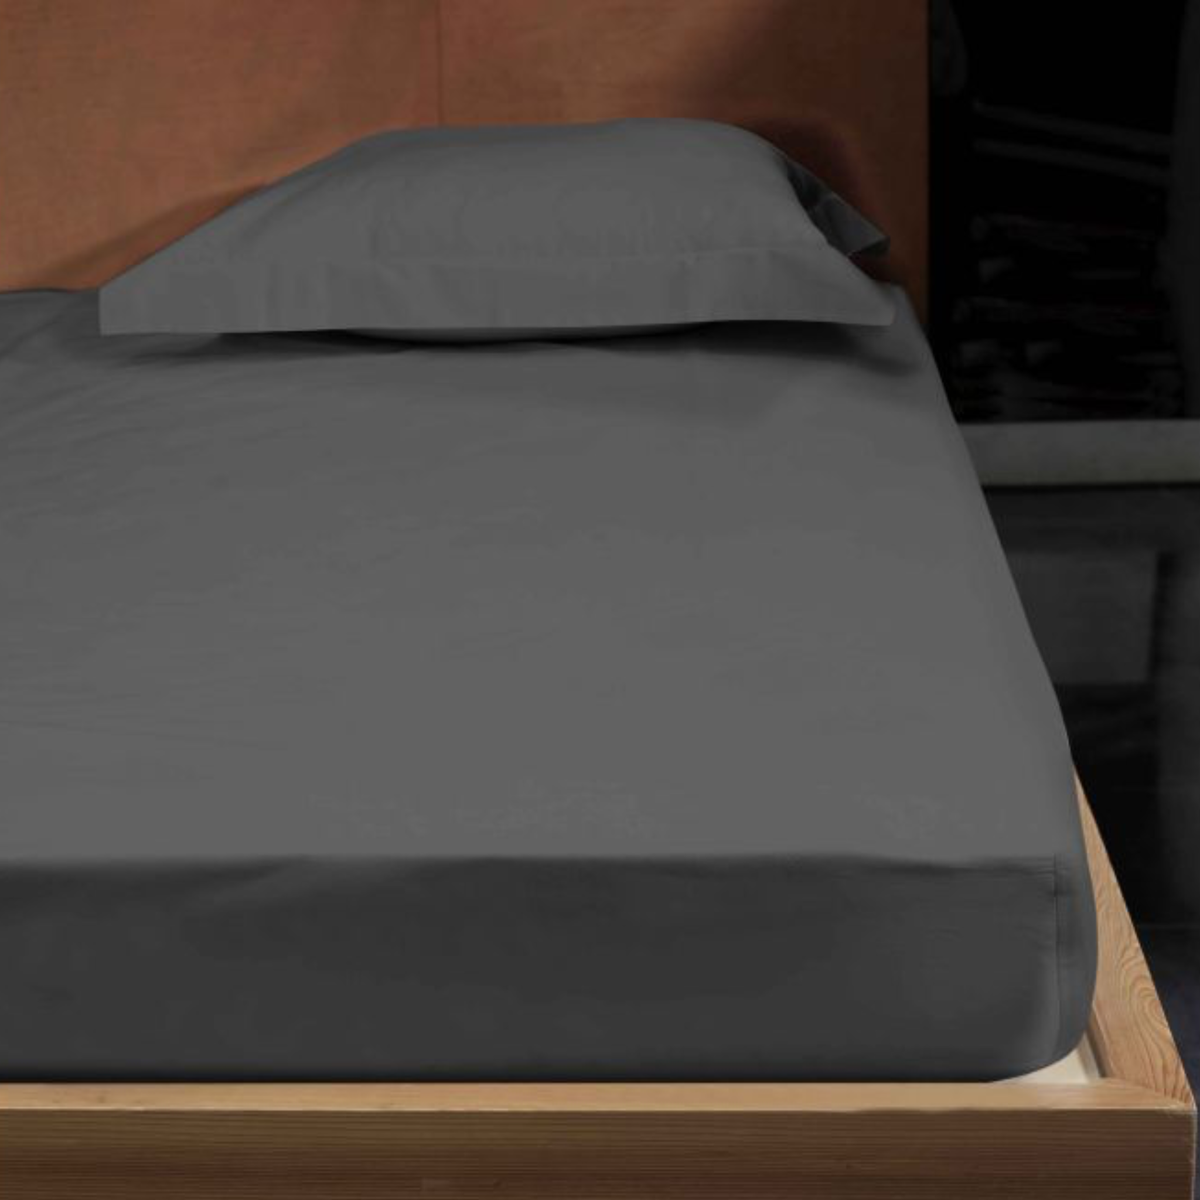 Fitted Bed Sheet of Signoria Gemma Bedding in Lead Grey Color